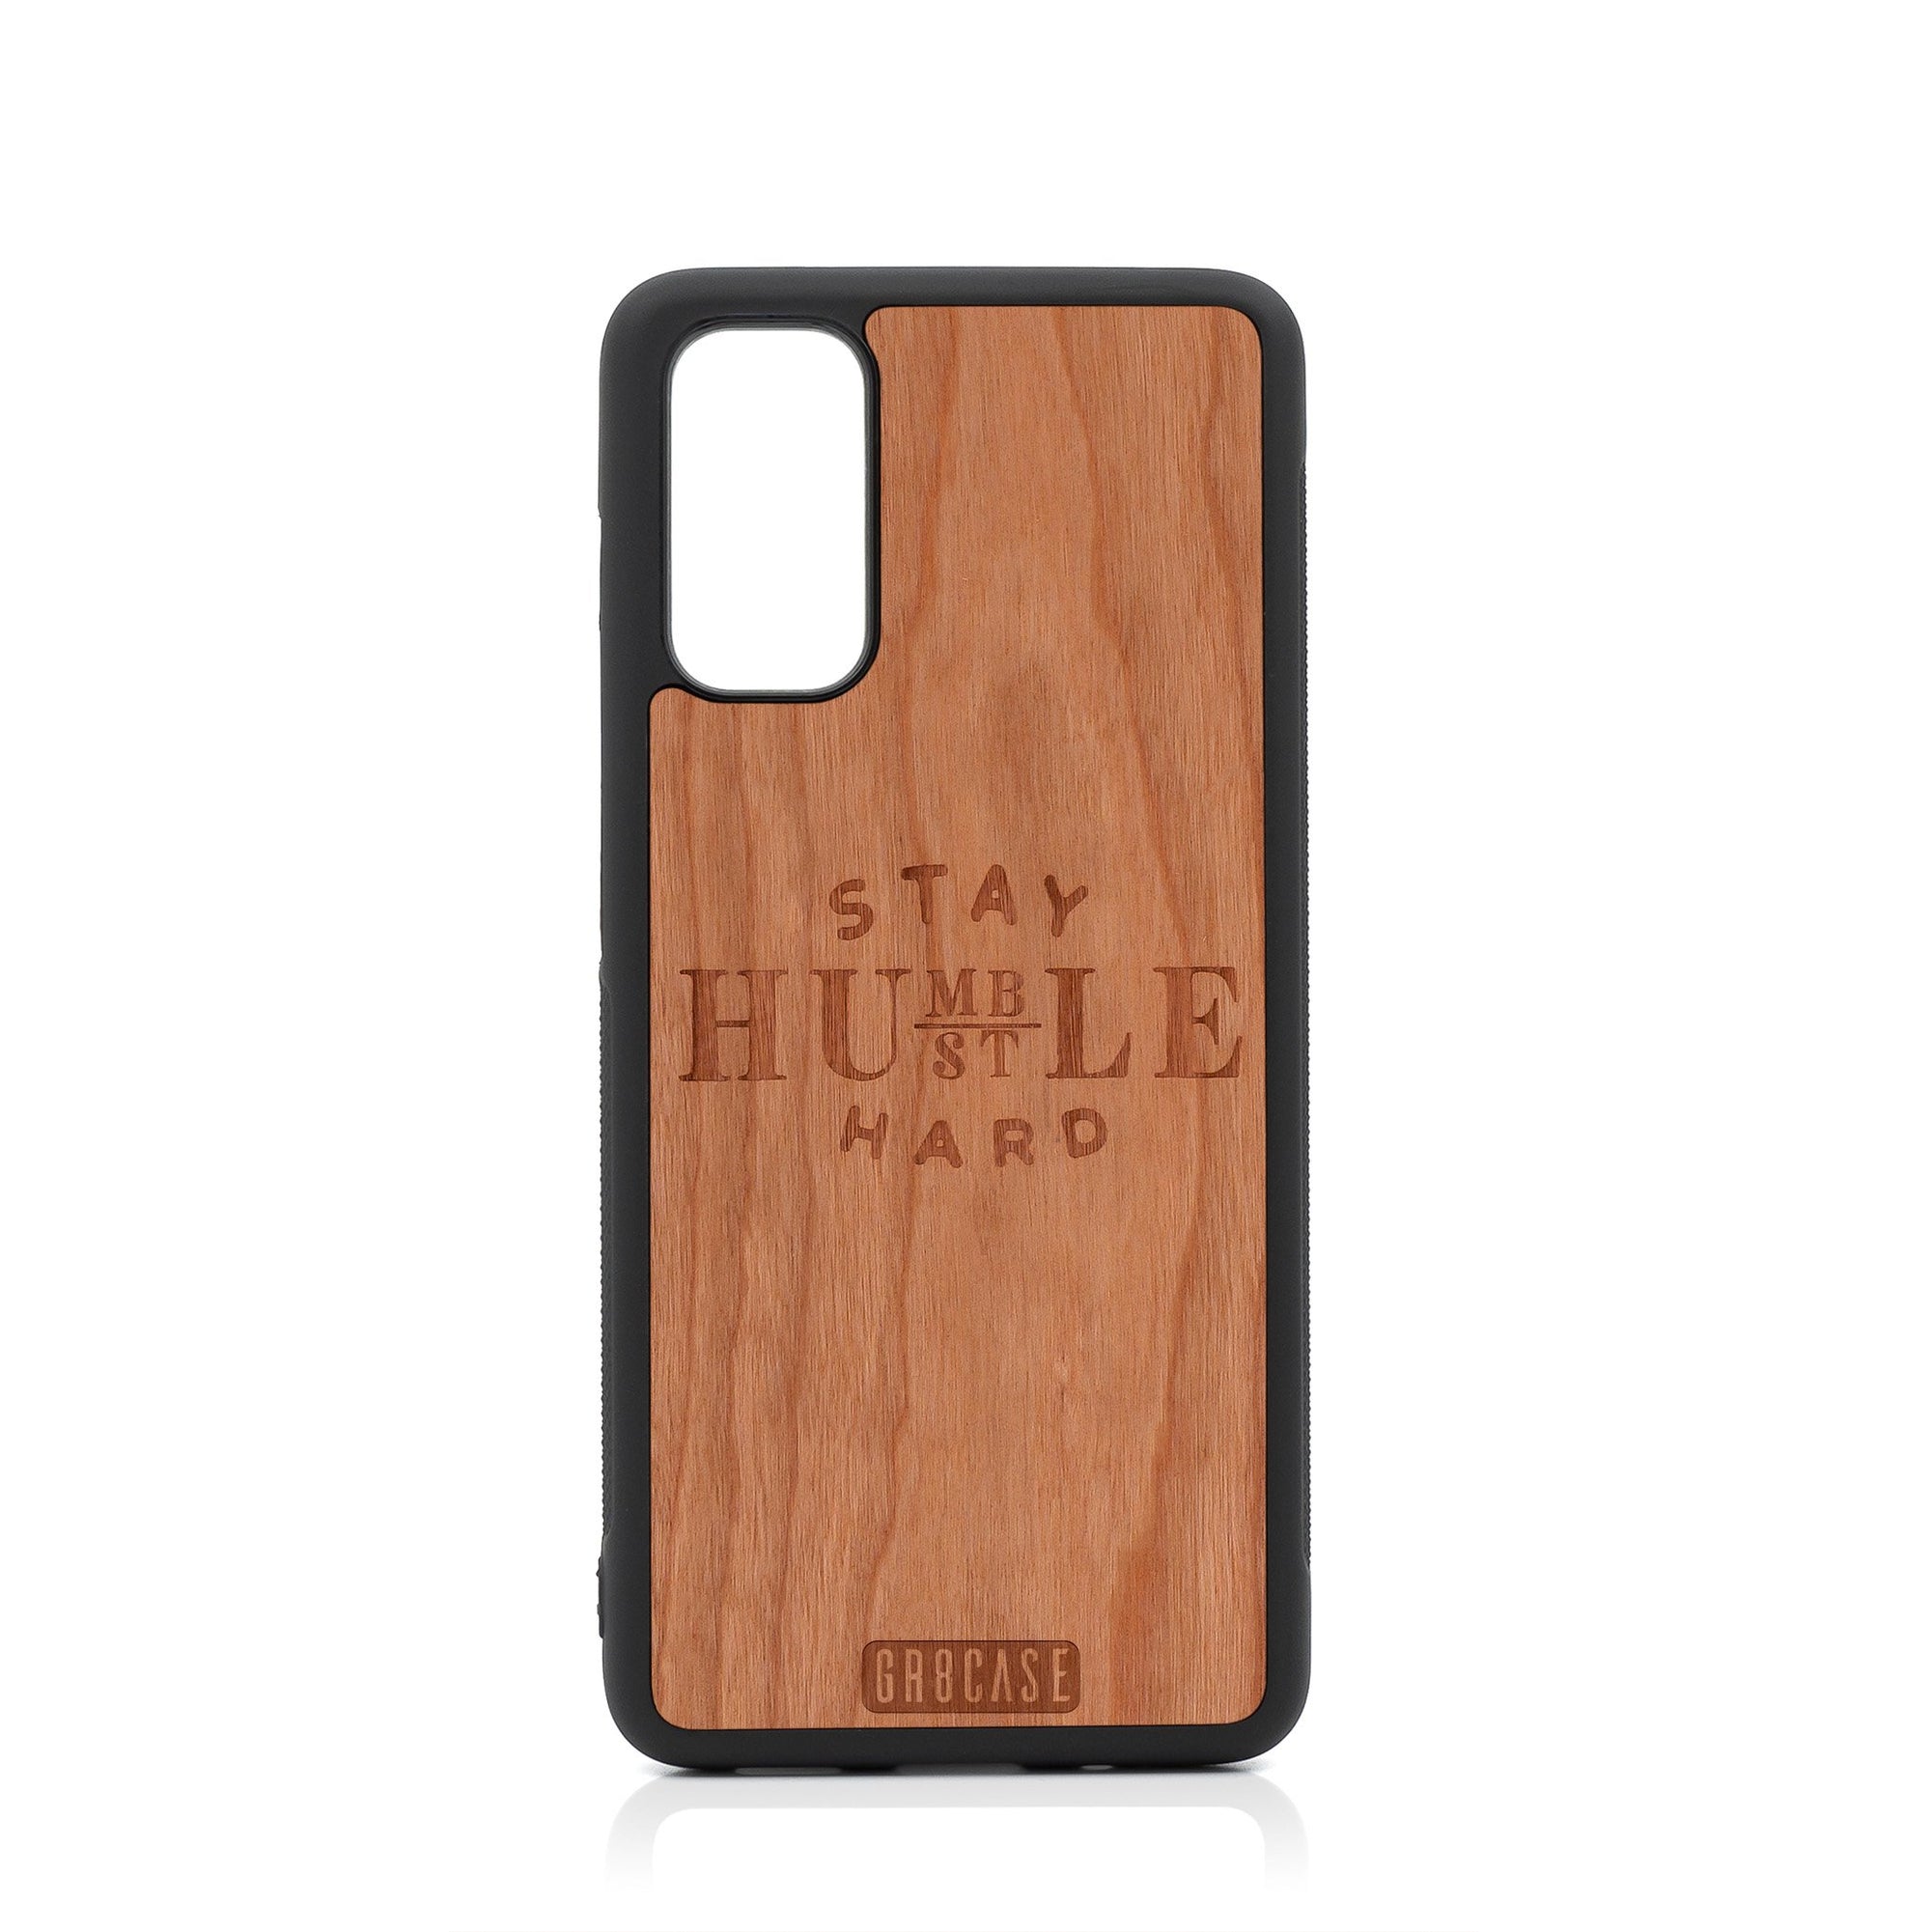 Stay Humble Hustle Hard Design Wood Case For Samsung Galaxy S20 FE 5G by GR8CASE